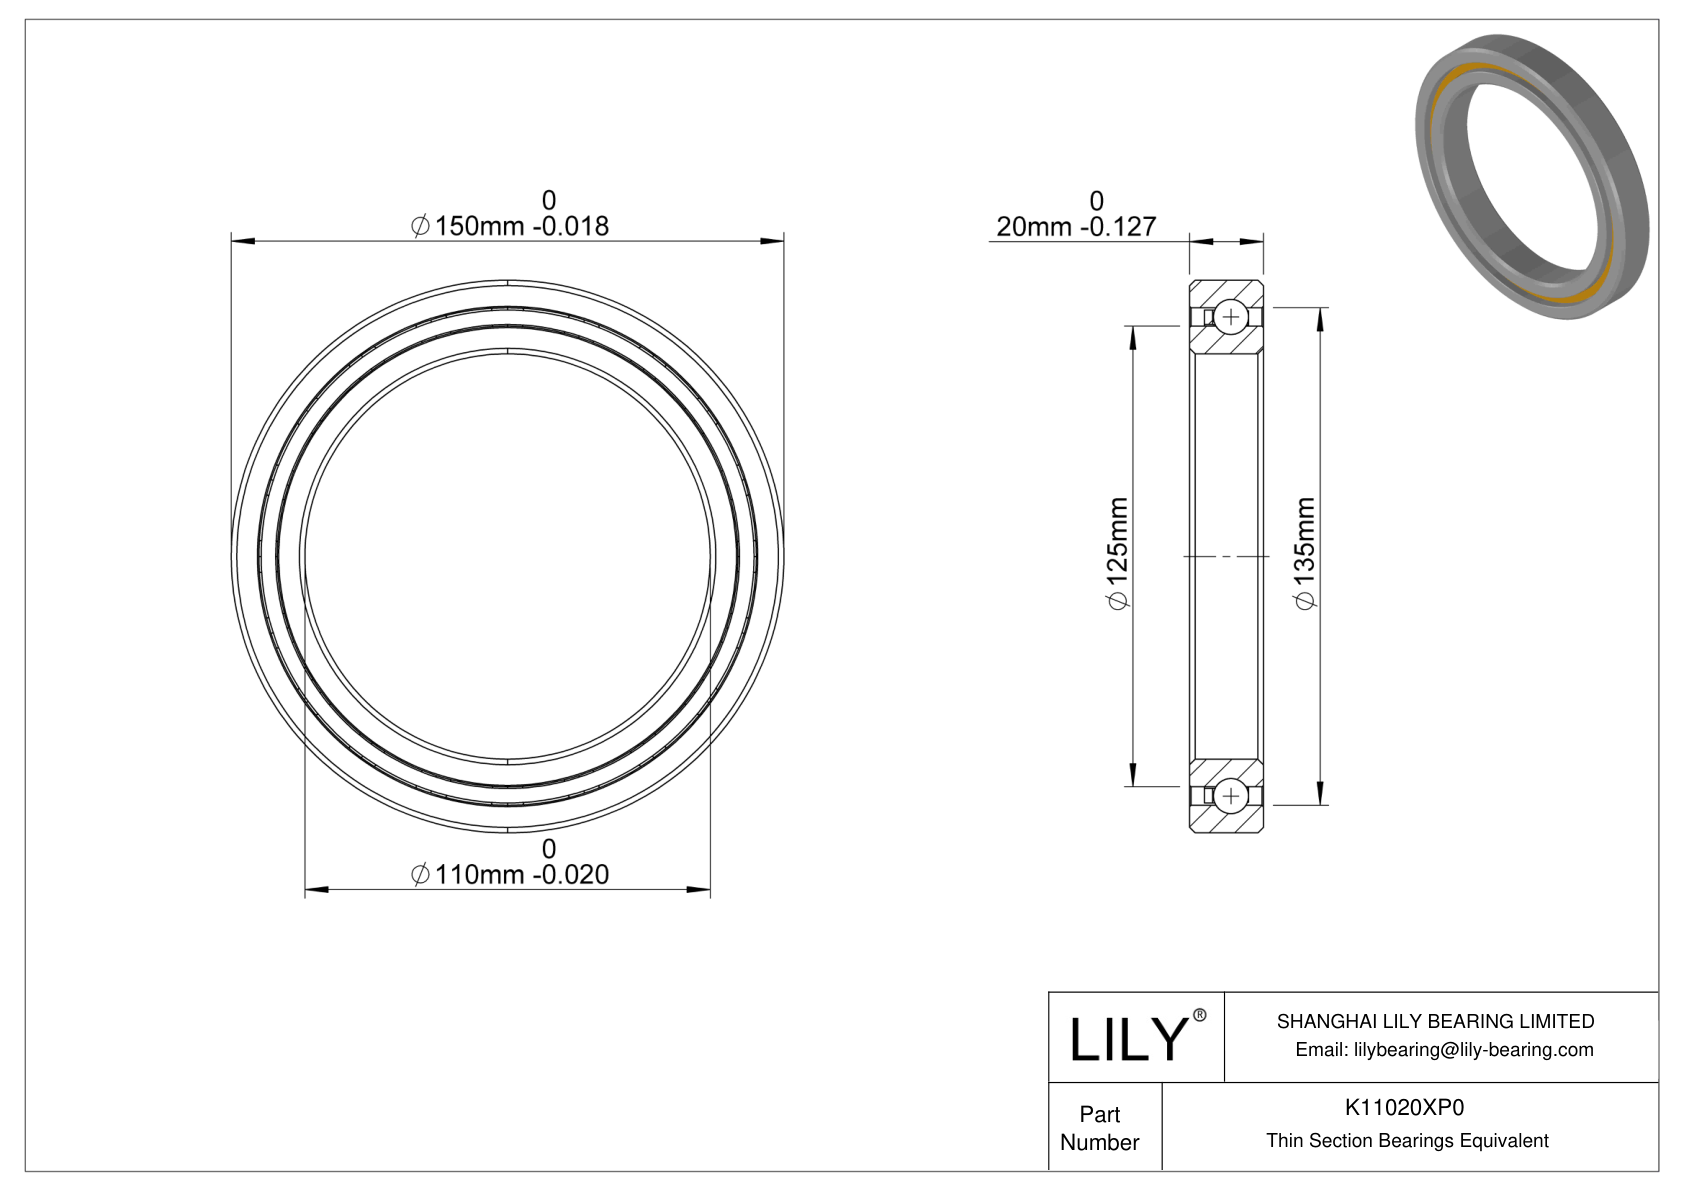 K11020XP0 Constant Section (CS) Bearings cad drawing